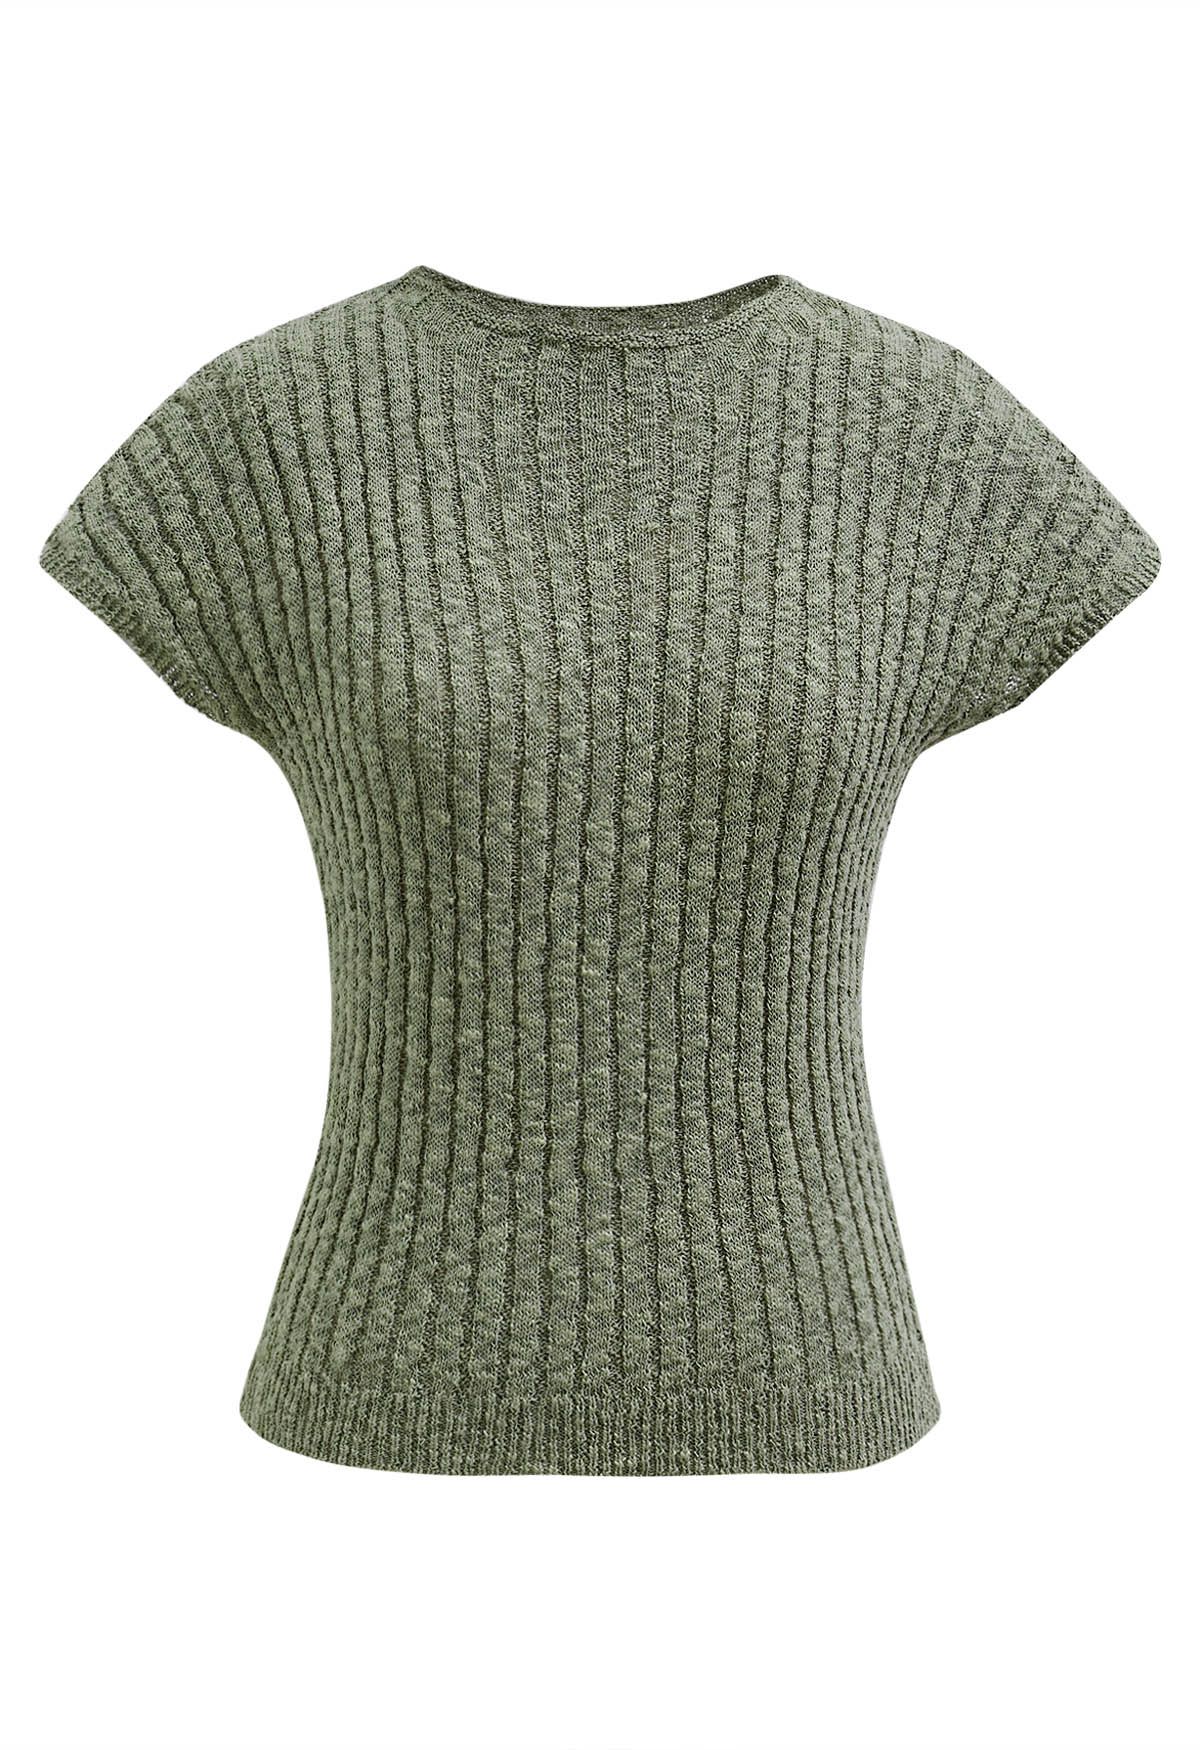 Basic Cap Sleeve Cotton Top in Olive